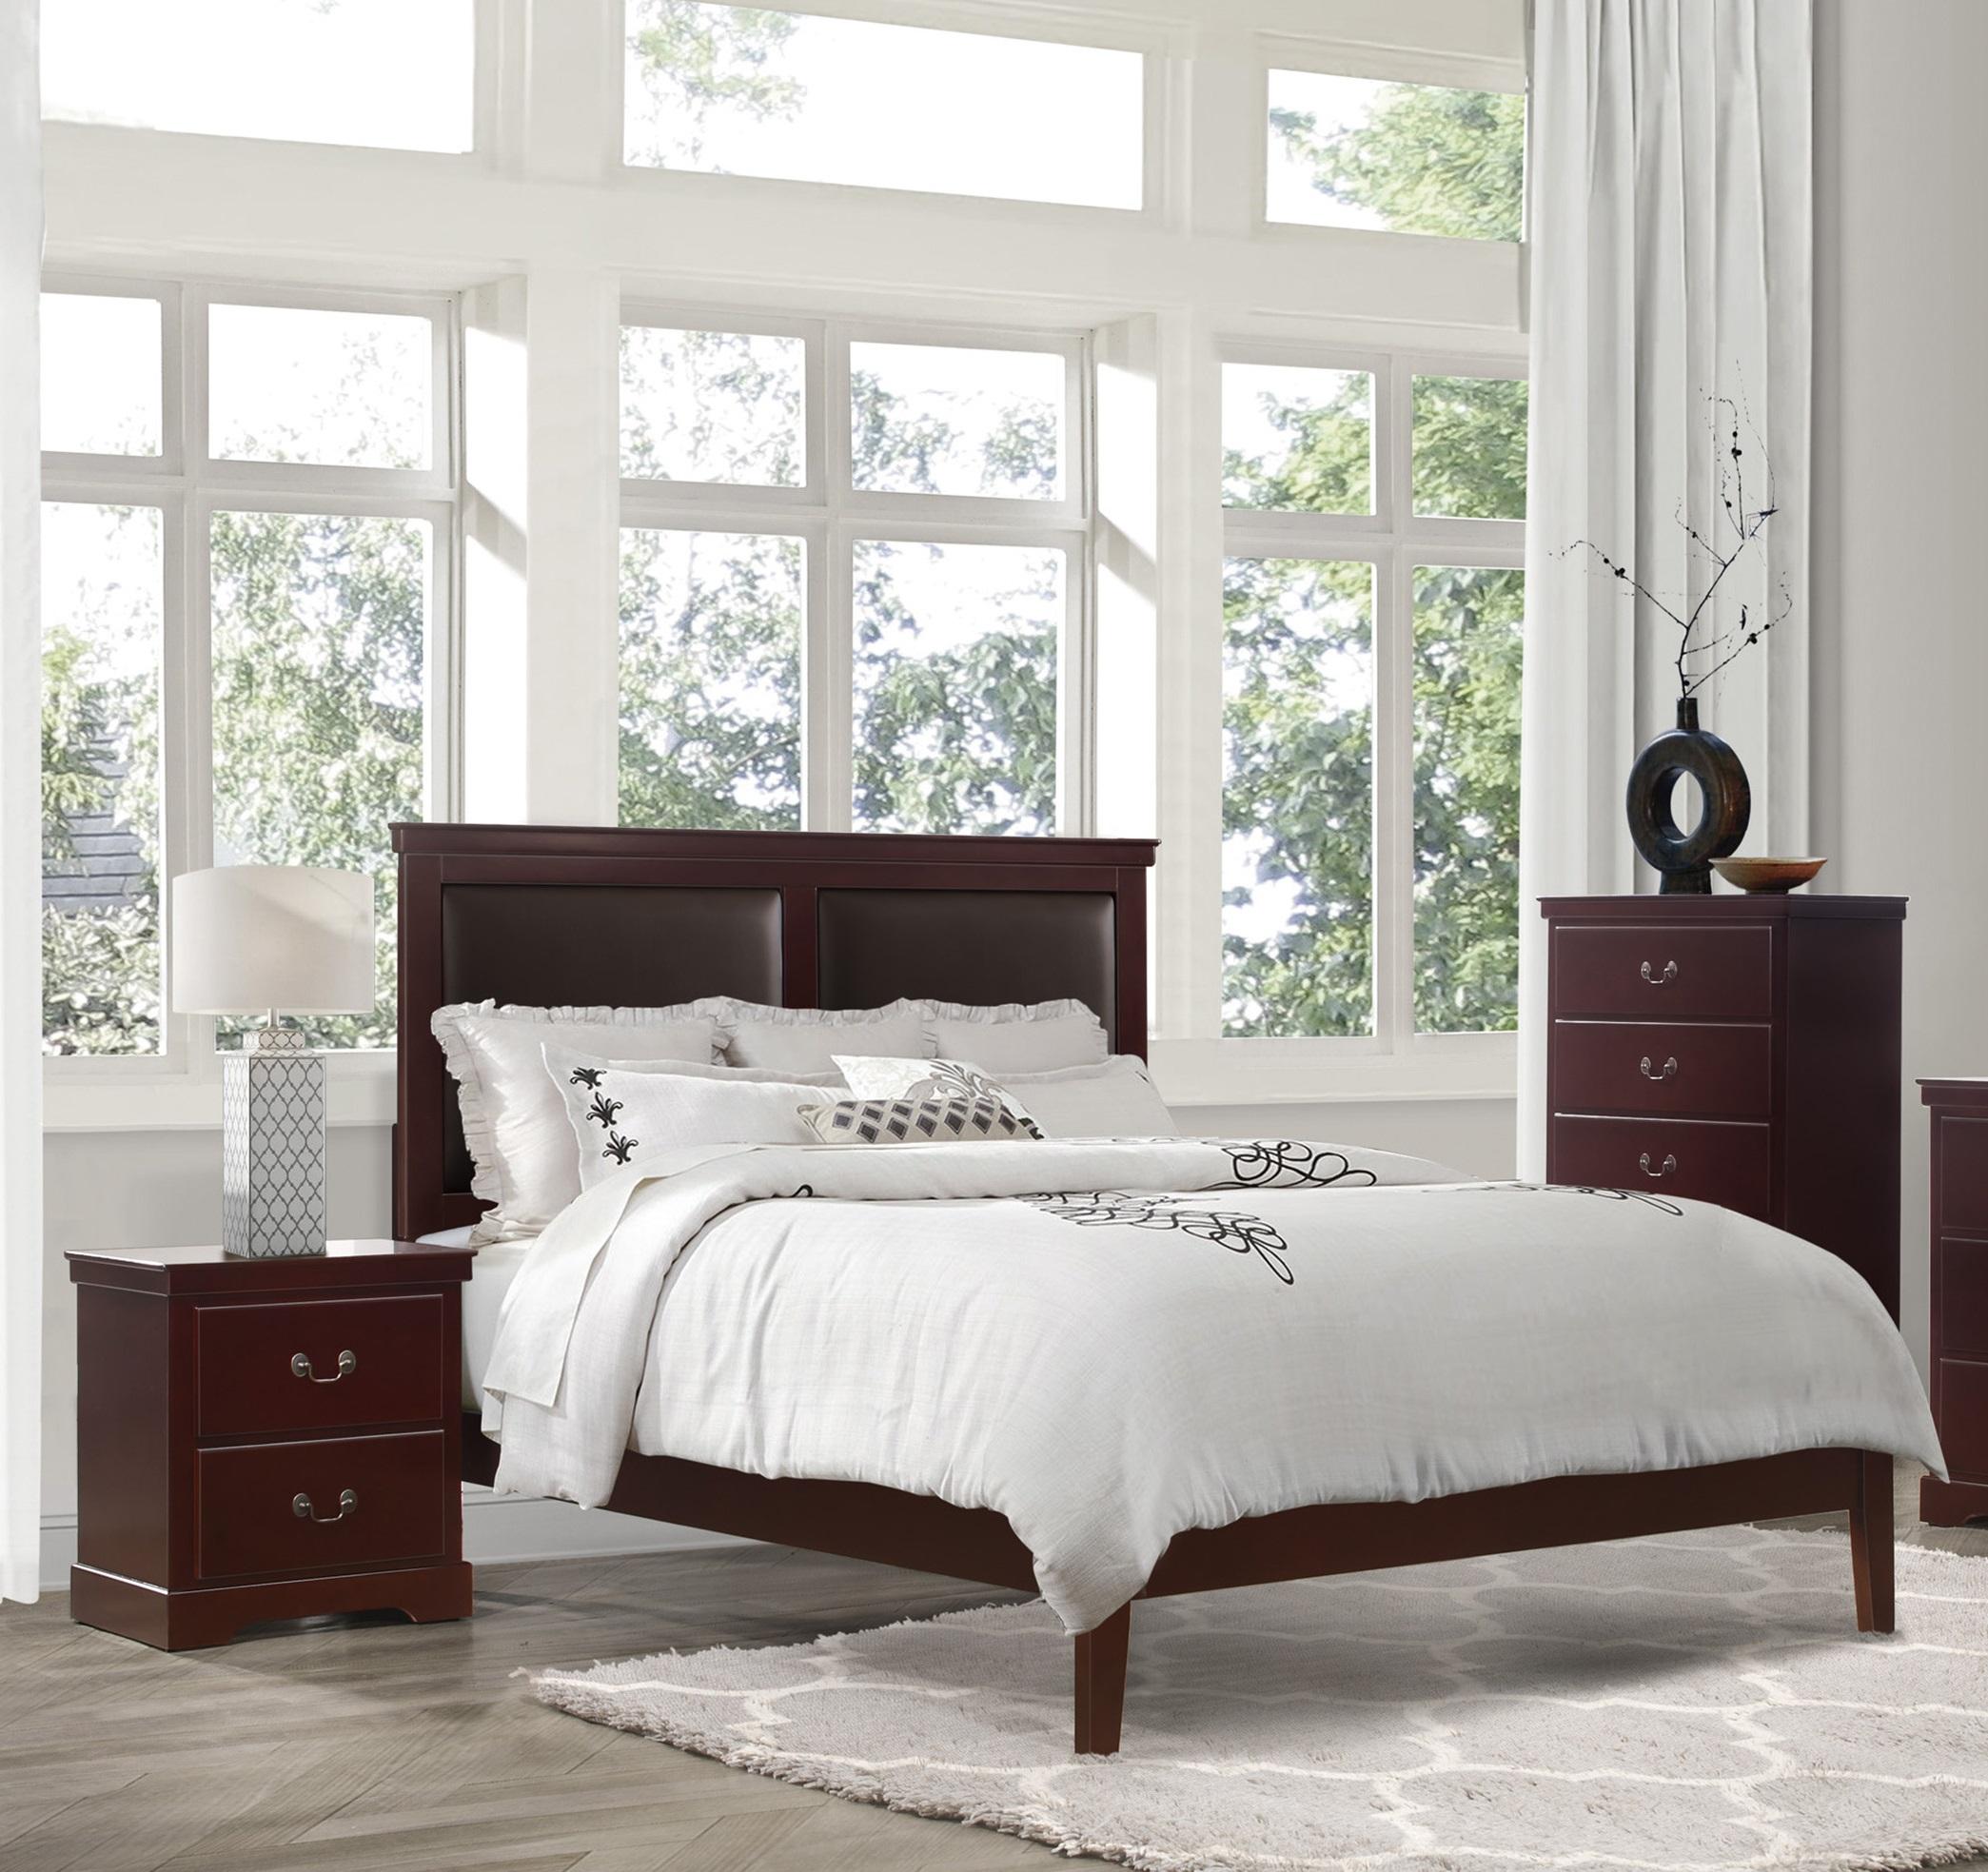 Modern Bedroom Set 1519CH-1-3PC Seabright 1519CH-1-3PC in Cherry Faux Leather